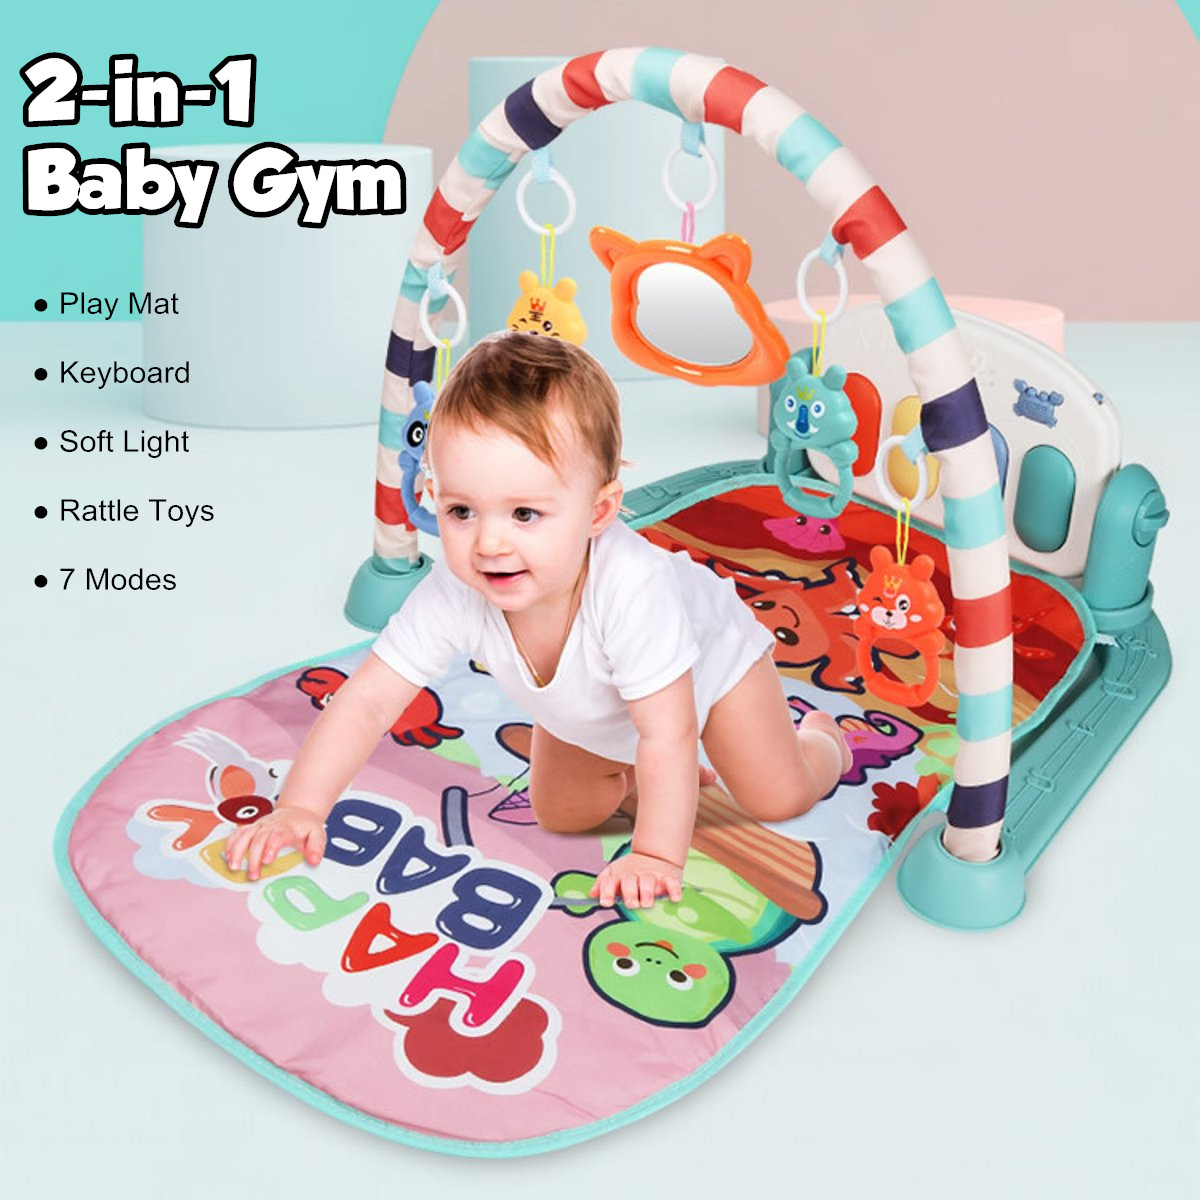 765643CM-2-IN-1-Multi-functional-Baby-Gym-with-Play-Mat-Keyboard-Soft-Light-Rattle-Toys-for-Baby-Gif-1709556-1